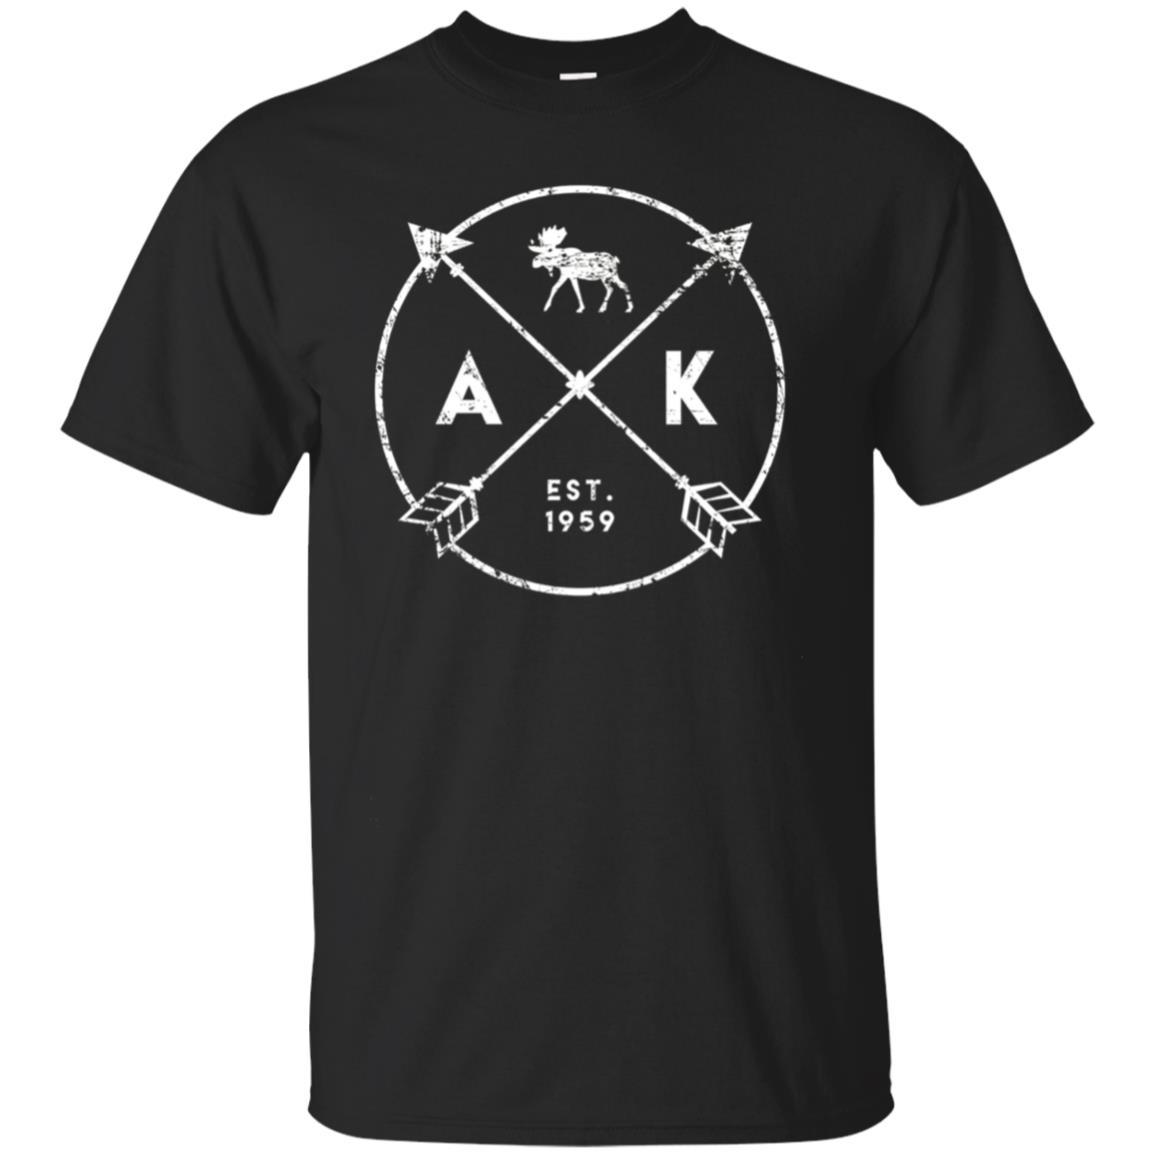 Cover Your Body With Amazing Alaska Adventure, Est 1959 Moose Arrows State T Shirt